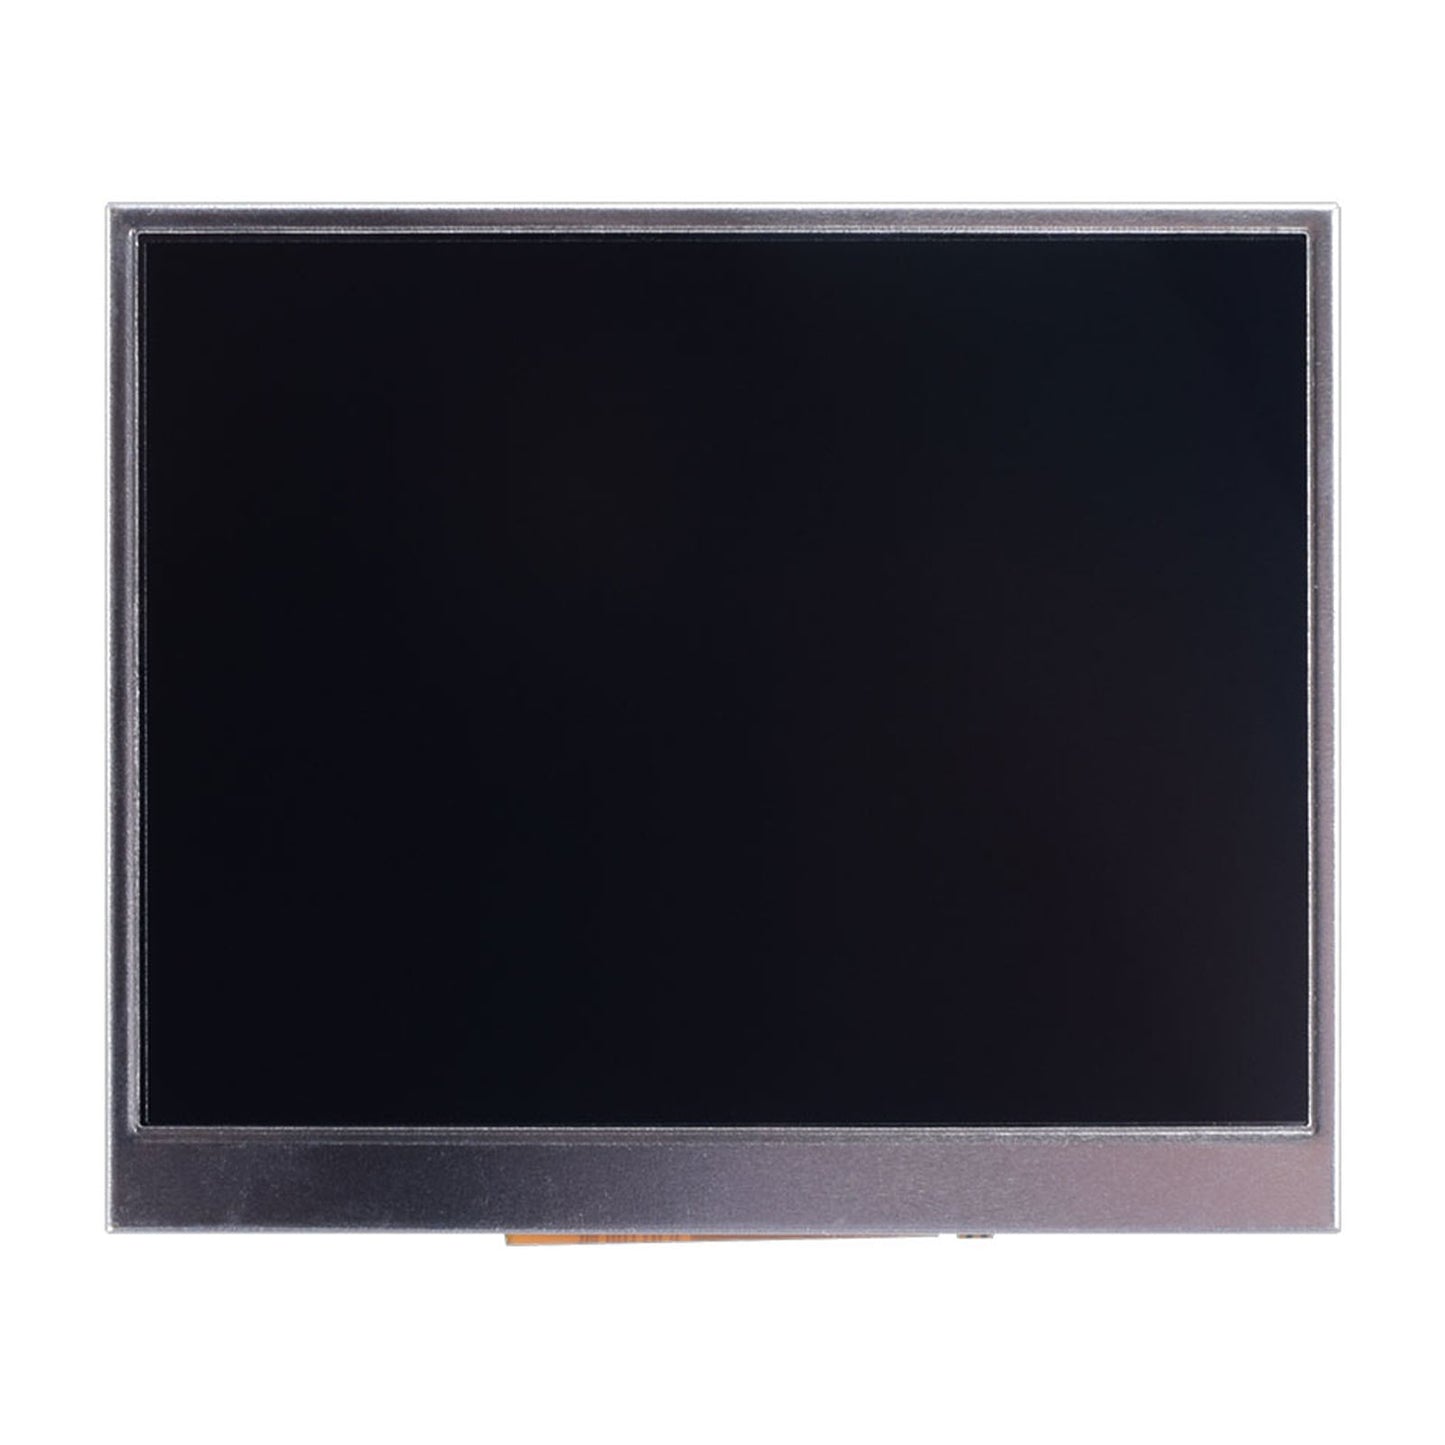 3.5-inch high brightness IPS display with 320x240 resolution and 920 nits brightness, using RGB interface